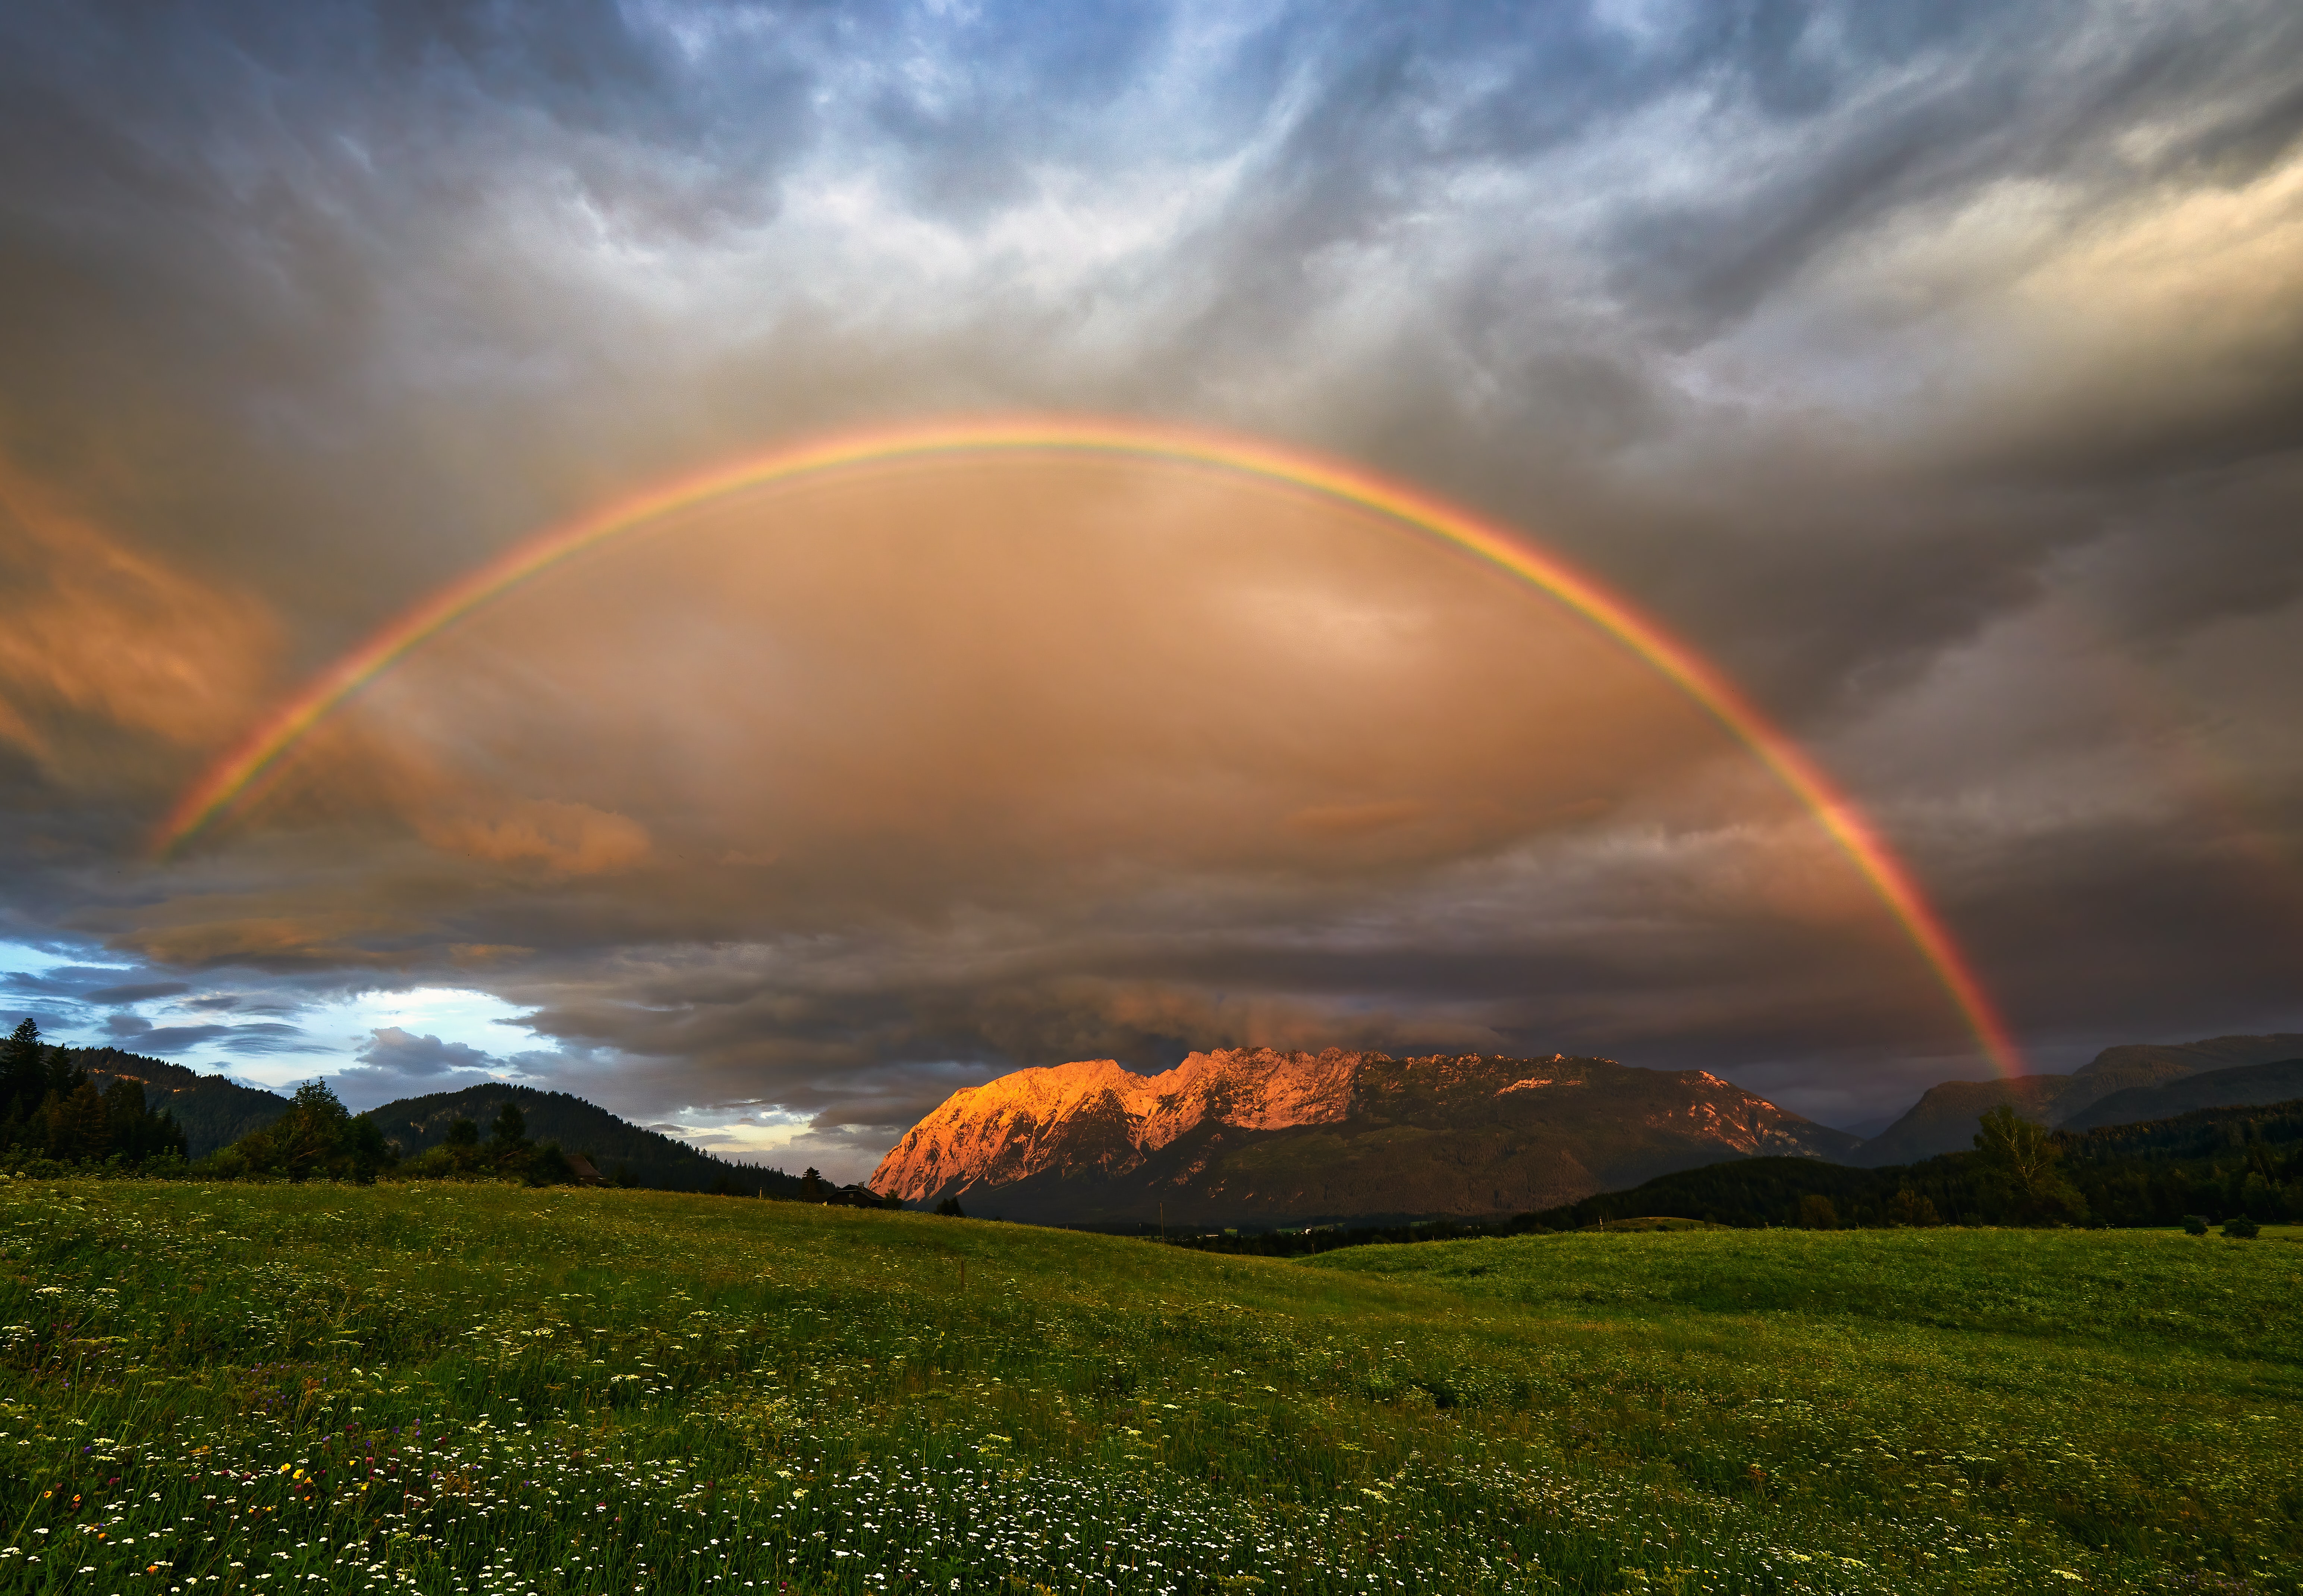 New Lock Screen Wallpapers landscape, meadow, mountains, nature, rainbow